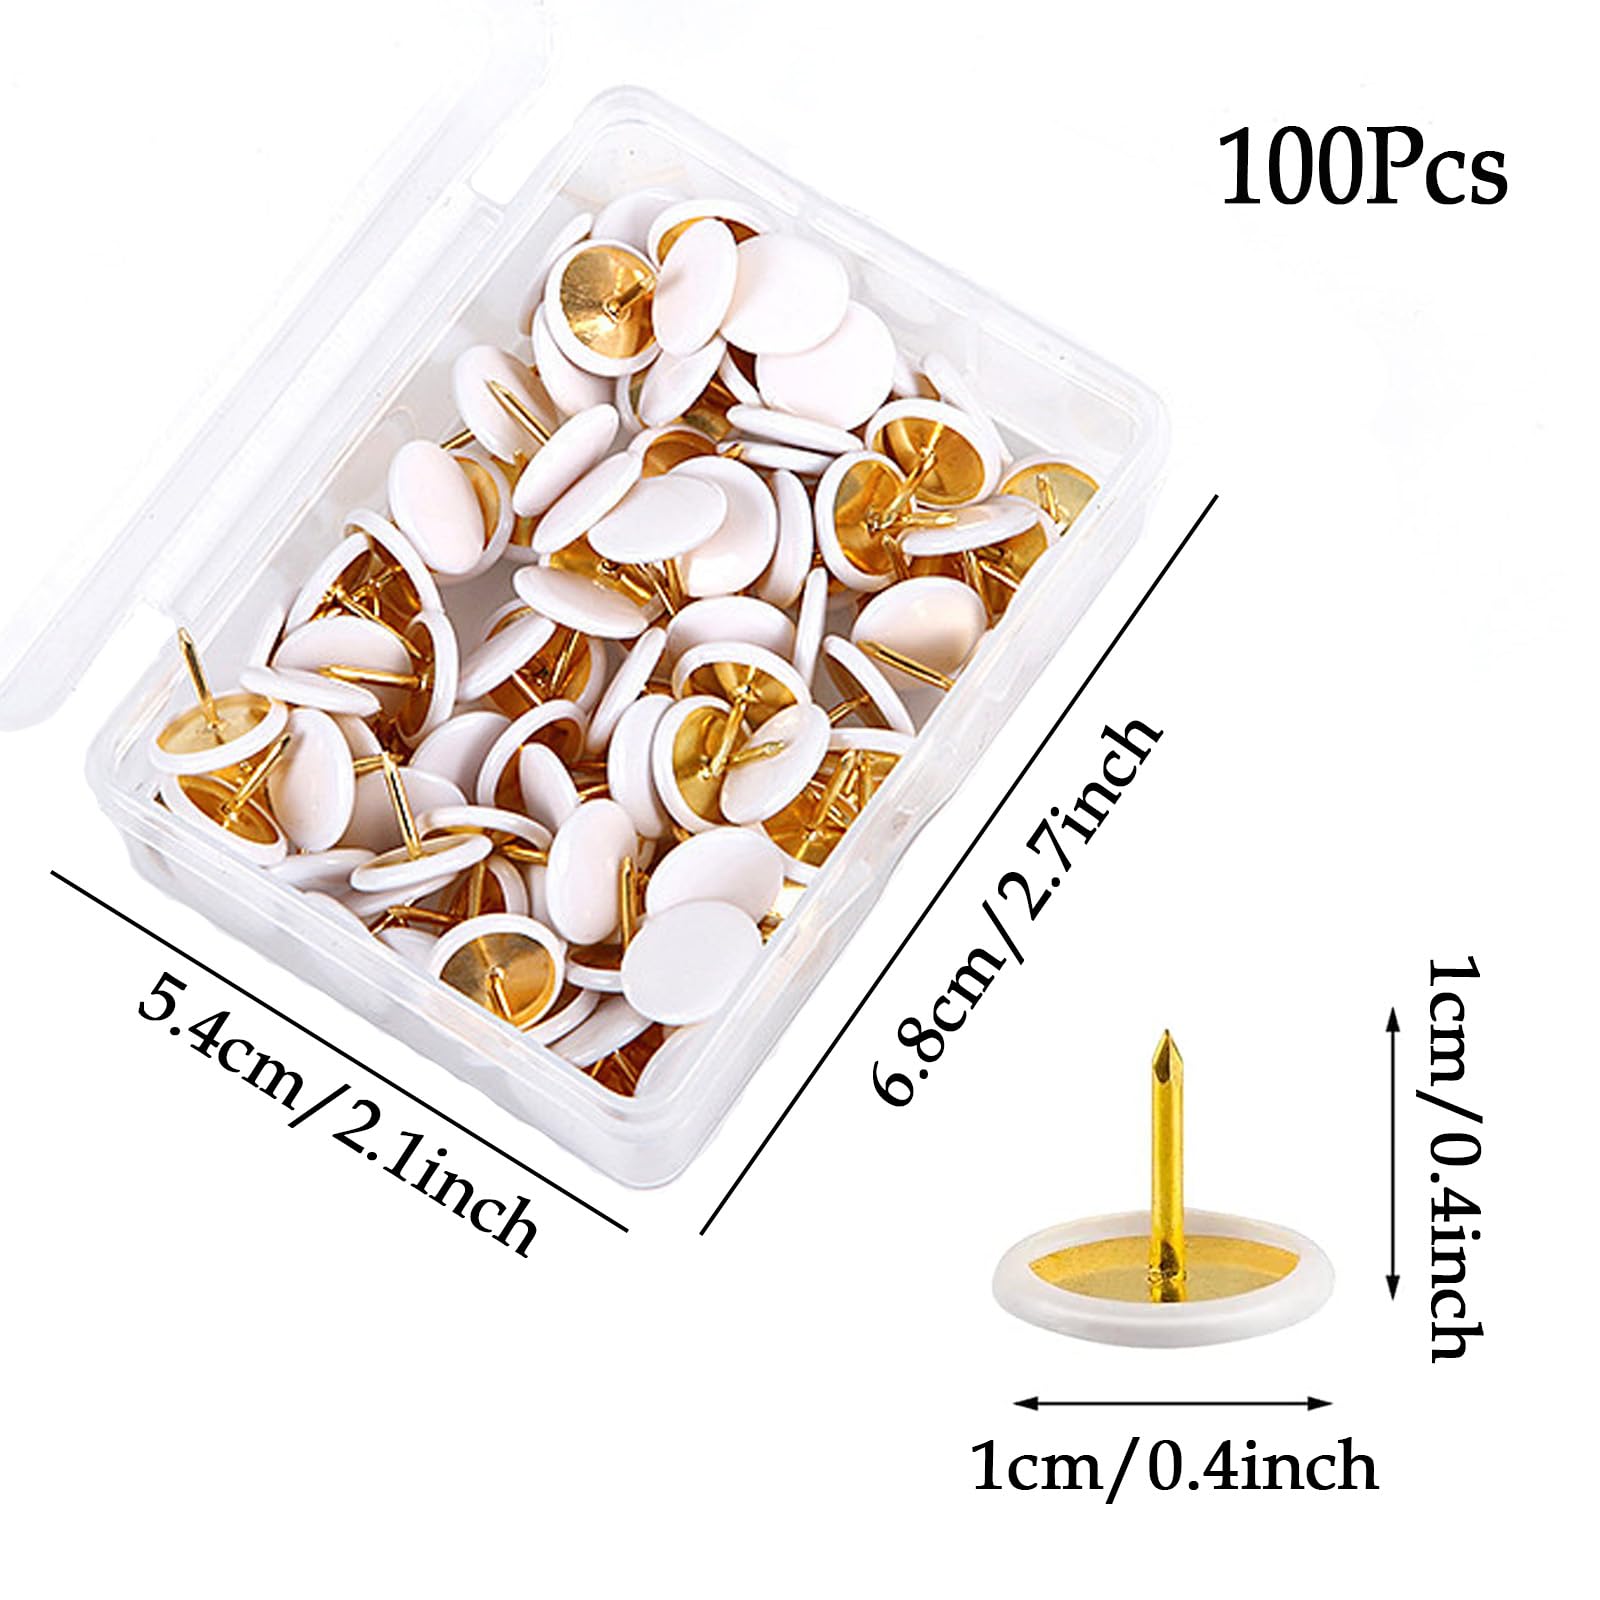 100 Pcs White Drawing Pins, drawing pins for walls, Decorative Drawing Pins Round HeadStorage Box for Wall Hangings Cork Board Maps Posters Photos Pinboard and Bulletin Boards